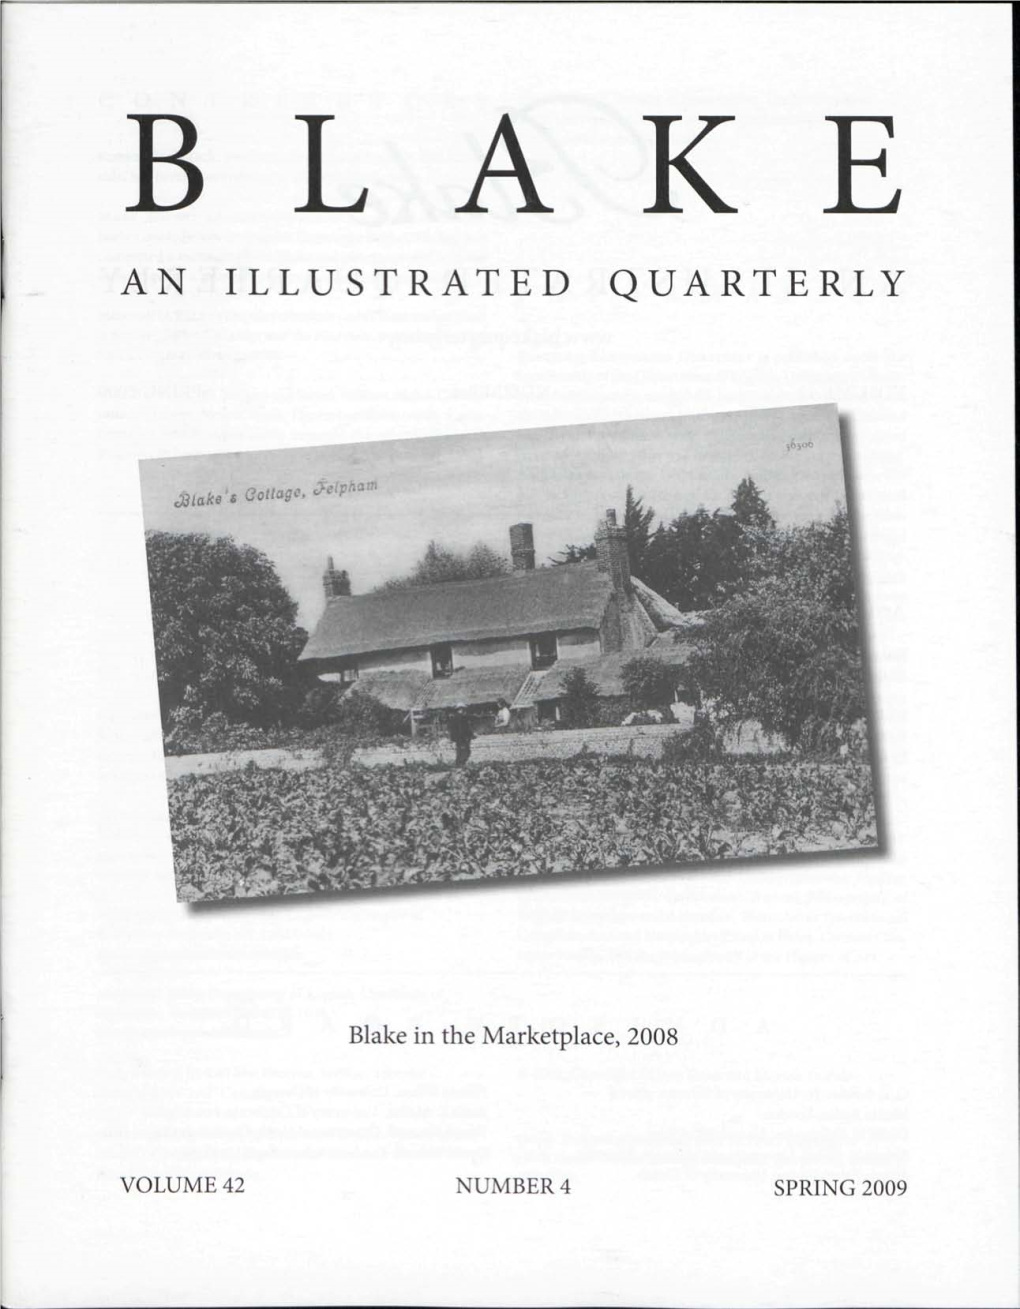 Issues) and Cordance Which Significantly Expands the Record of Blake's Begin with the Summer Issue